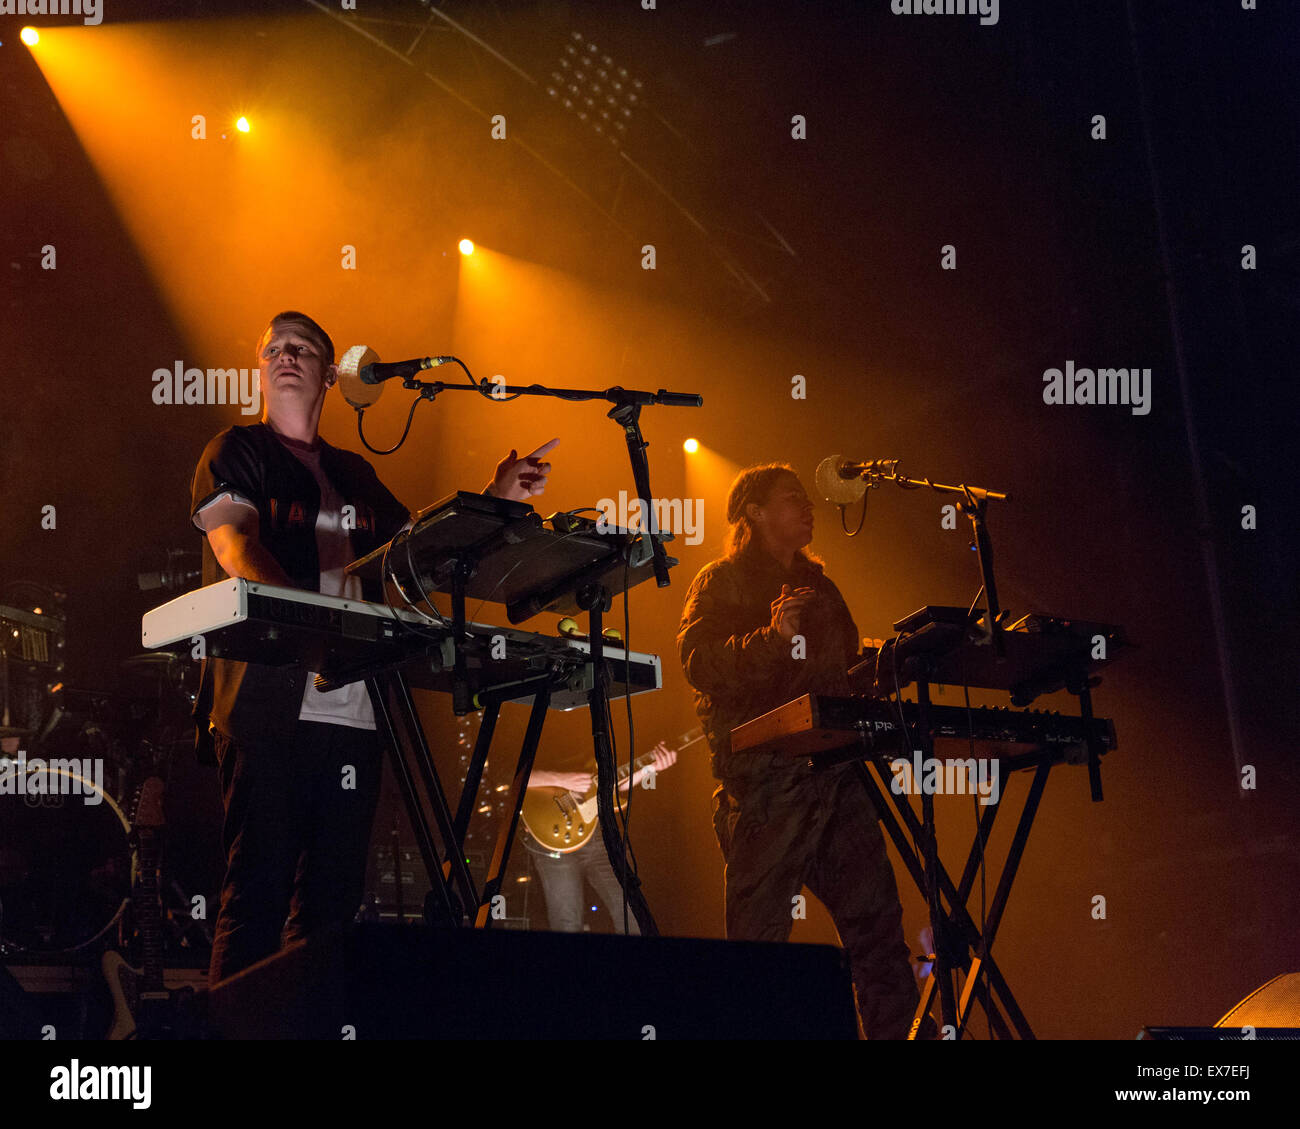 Dover, Deleware, USA. 18th June, 2015. JOSH LLOYD-WATSON (L) and TOM MCFARLAND of Jungle perform live on stage at the Firefly Music Festival in Dover, Delaware © Daniel DeSlover/ZUMA Wire/Alamy Live News Stock Photo